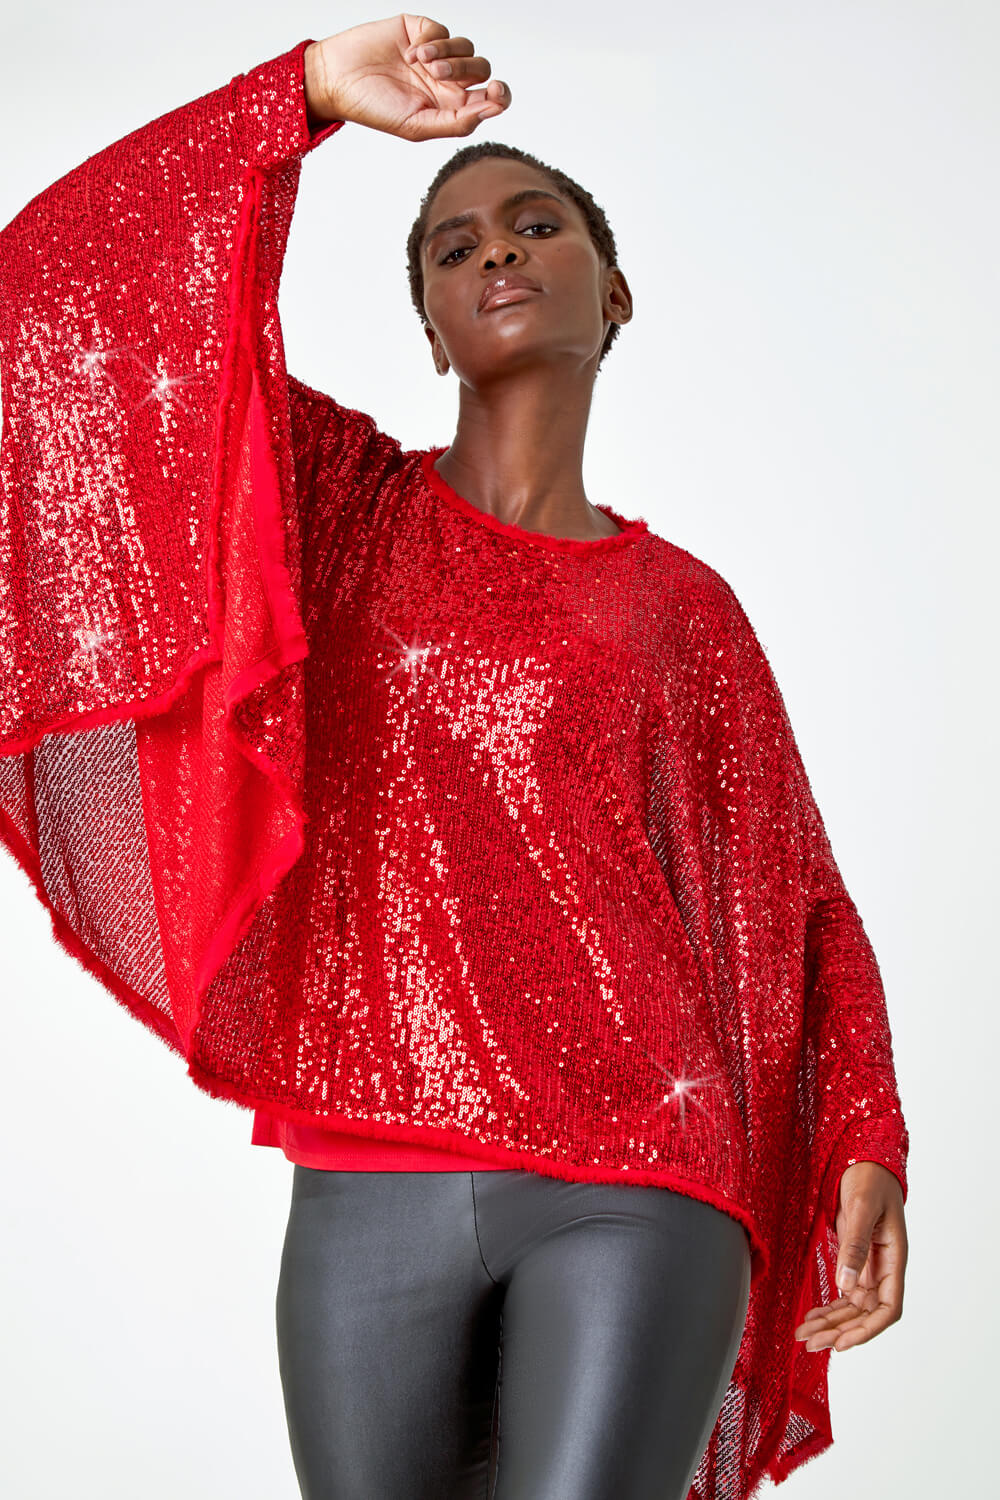 Red Sequin Cape Overlay Stretch Top, Image 5 of 7